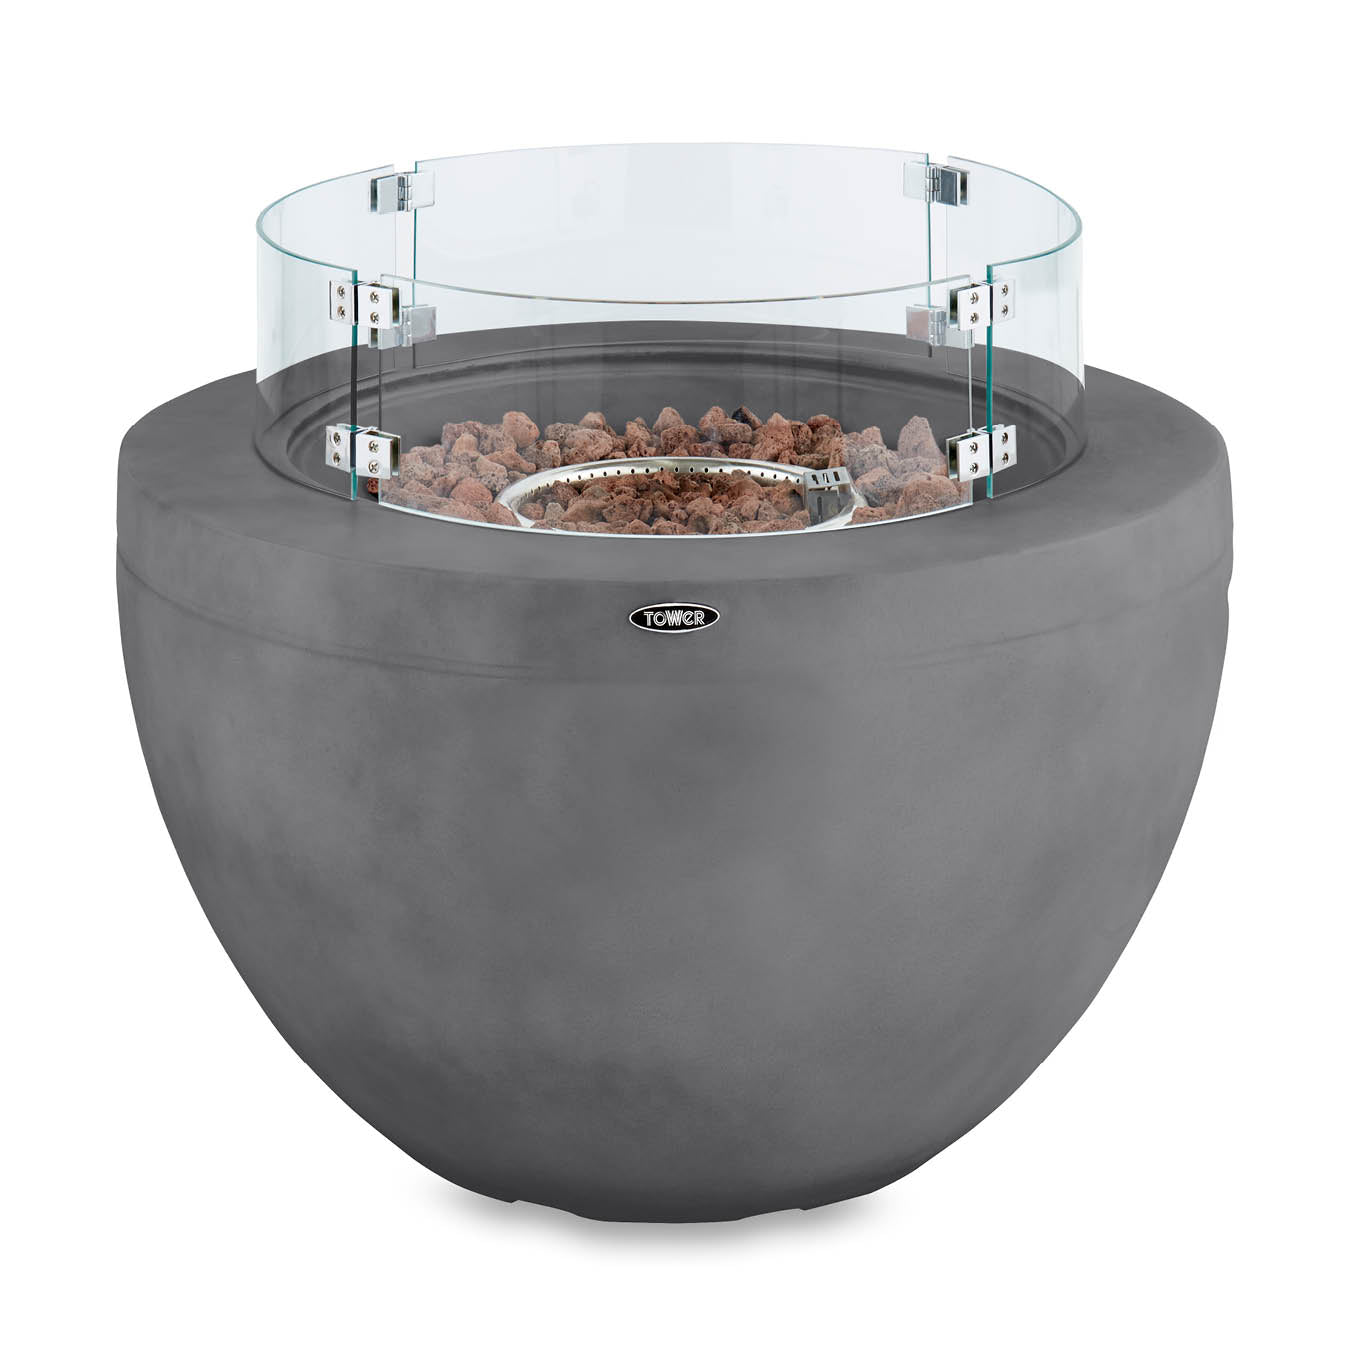 TOWER Magna Round Gas Fire Pit 5056462326924